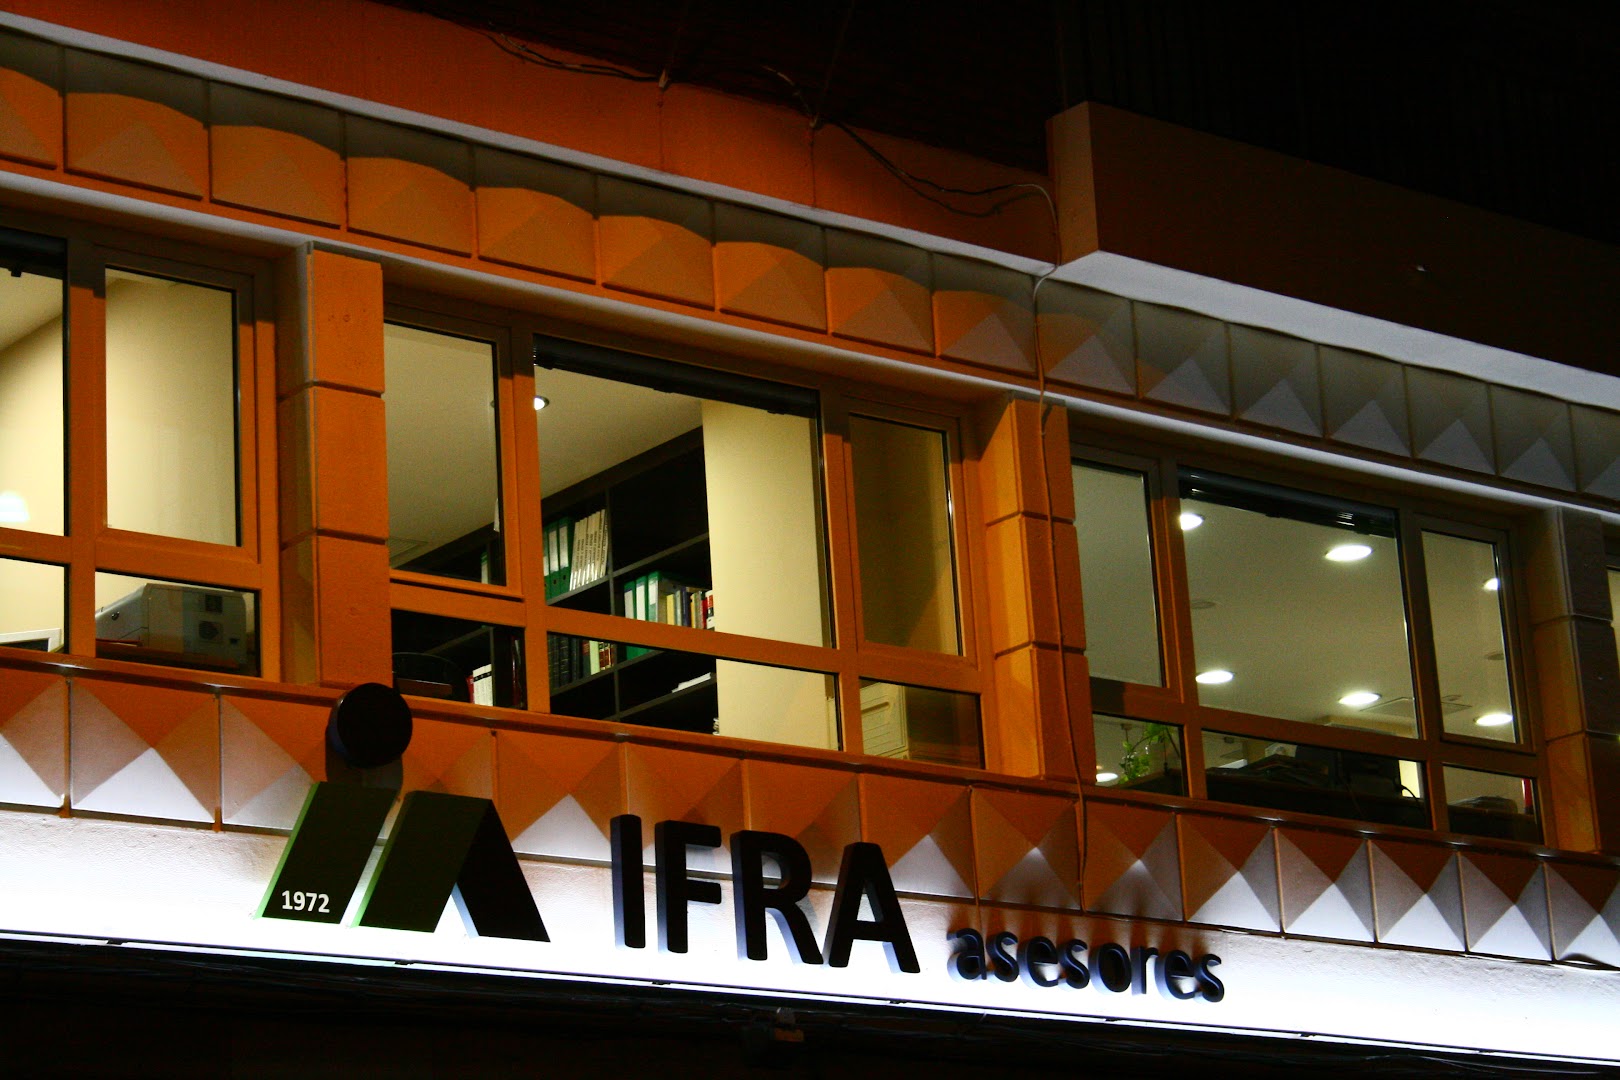 IFRA asesores